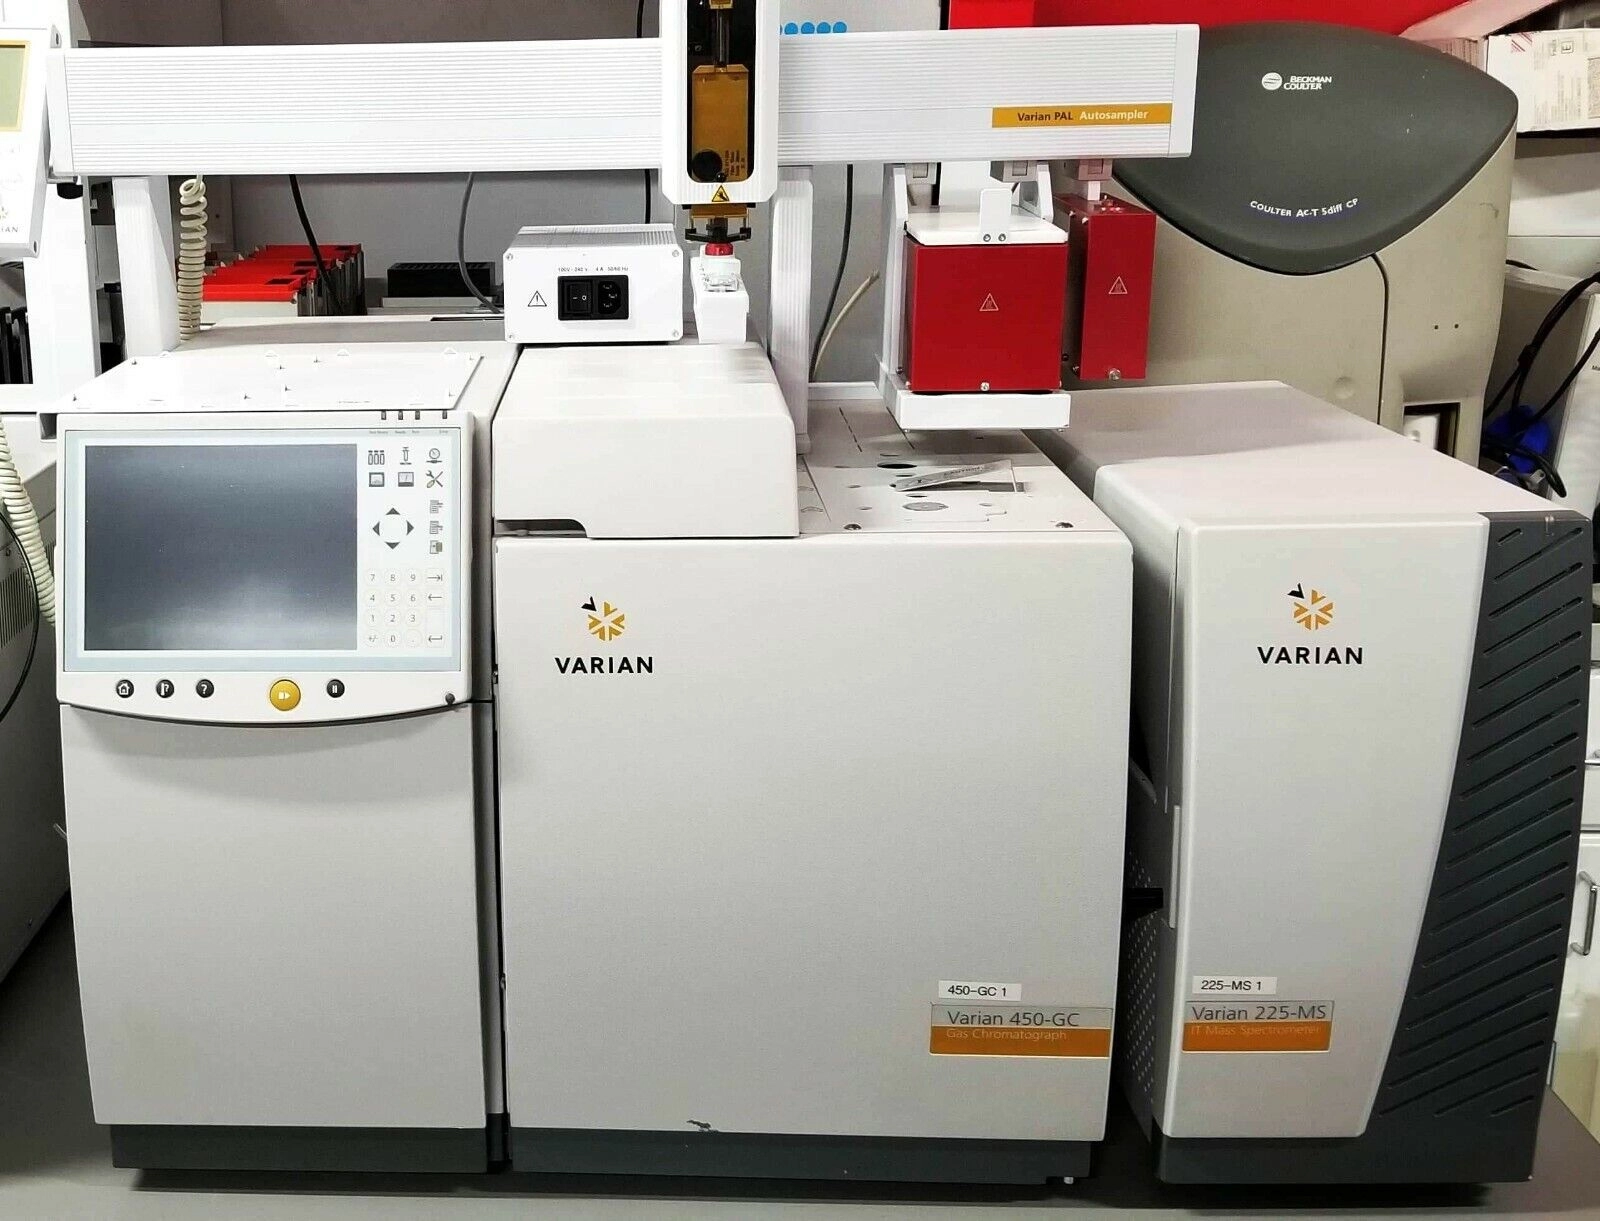 Varian 450-GC, 225-MS W/ PAL Autosampler Headspace